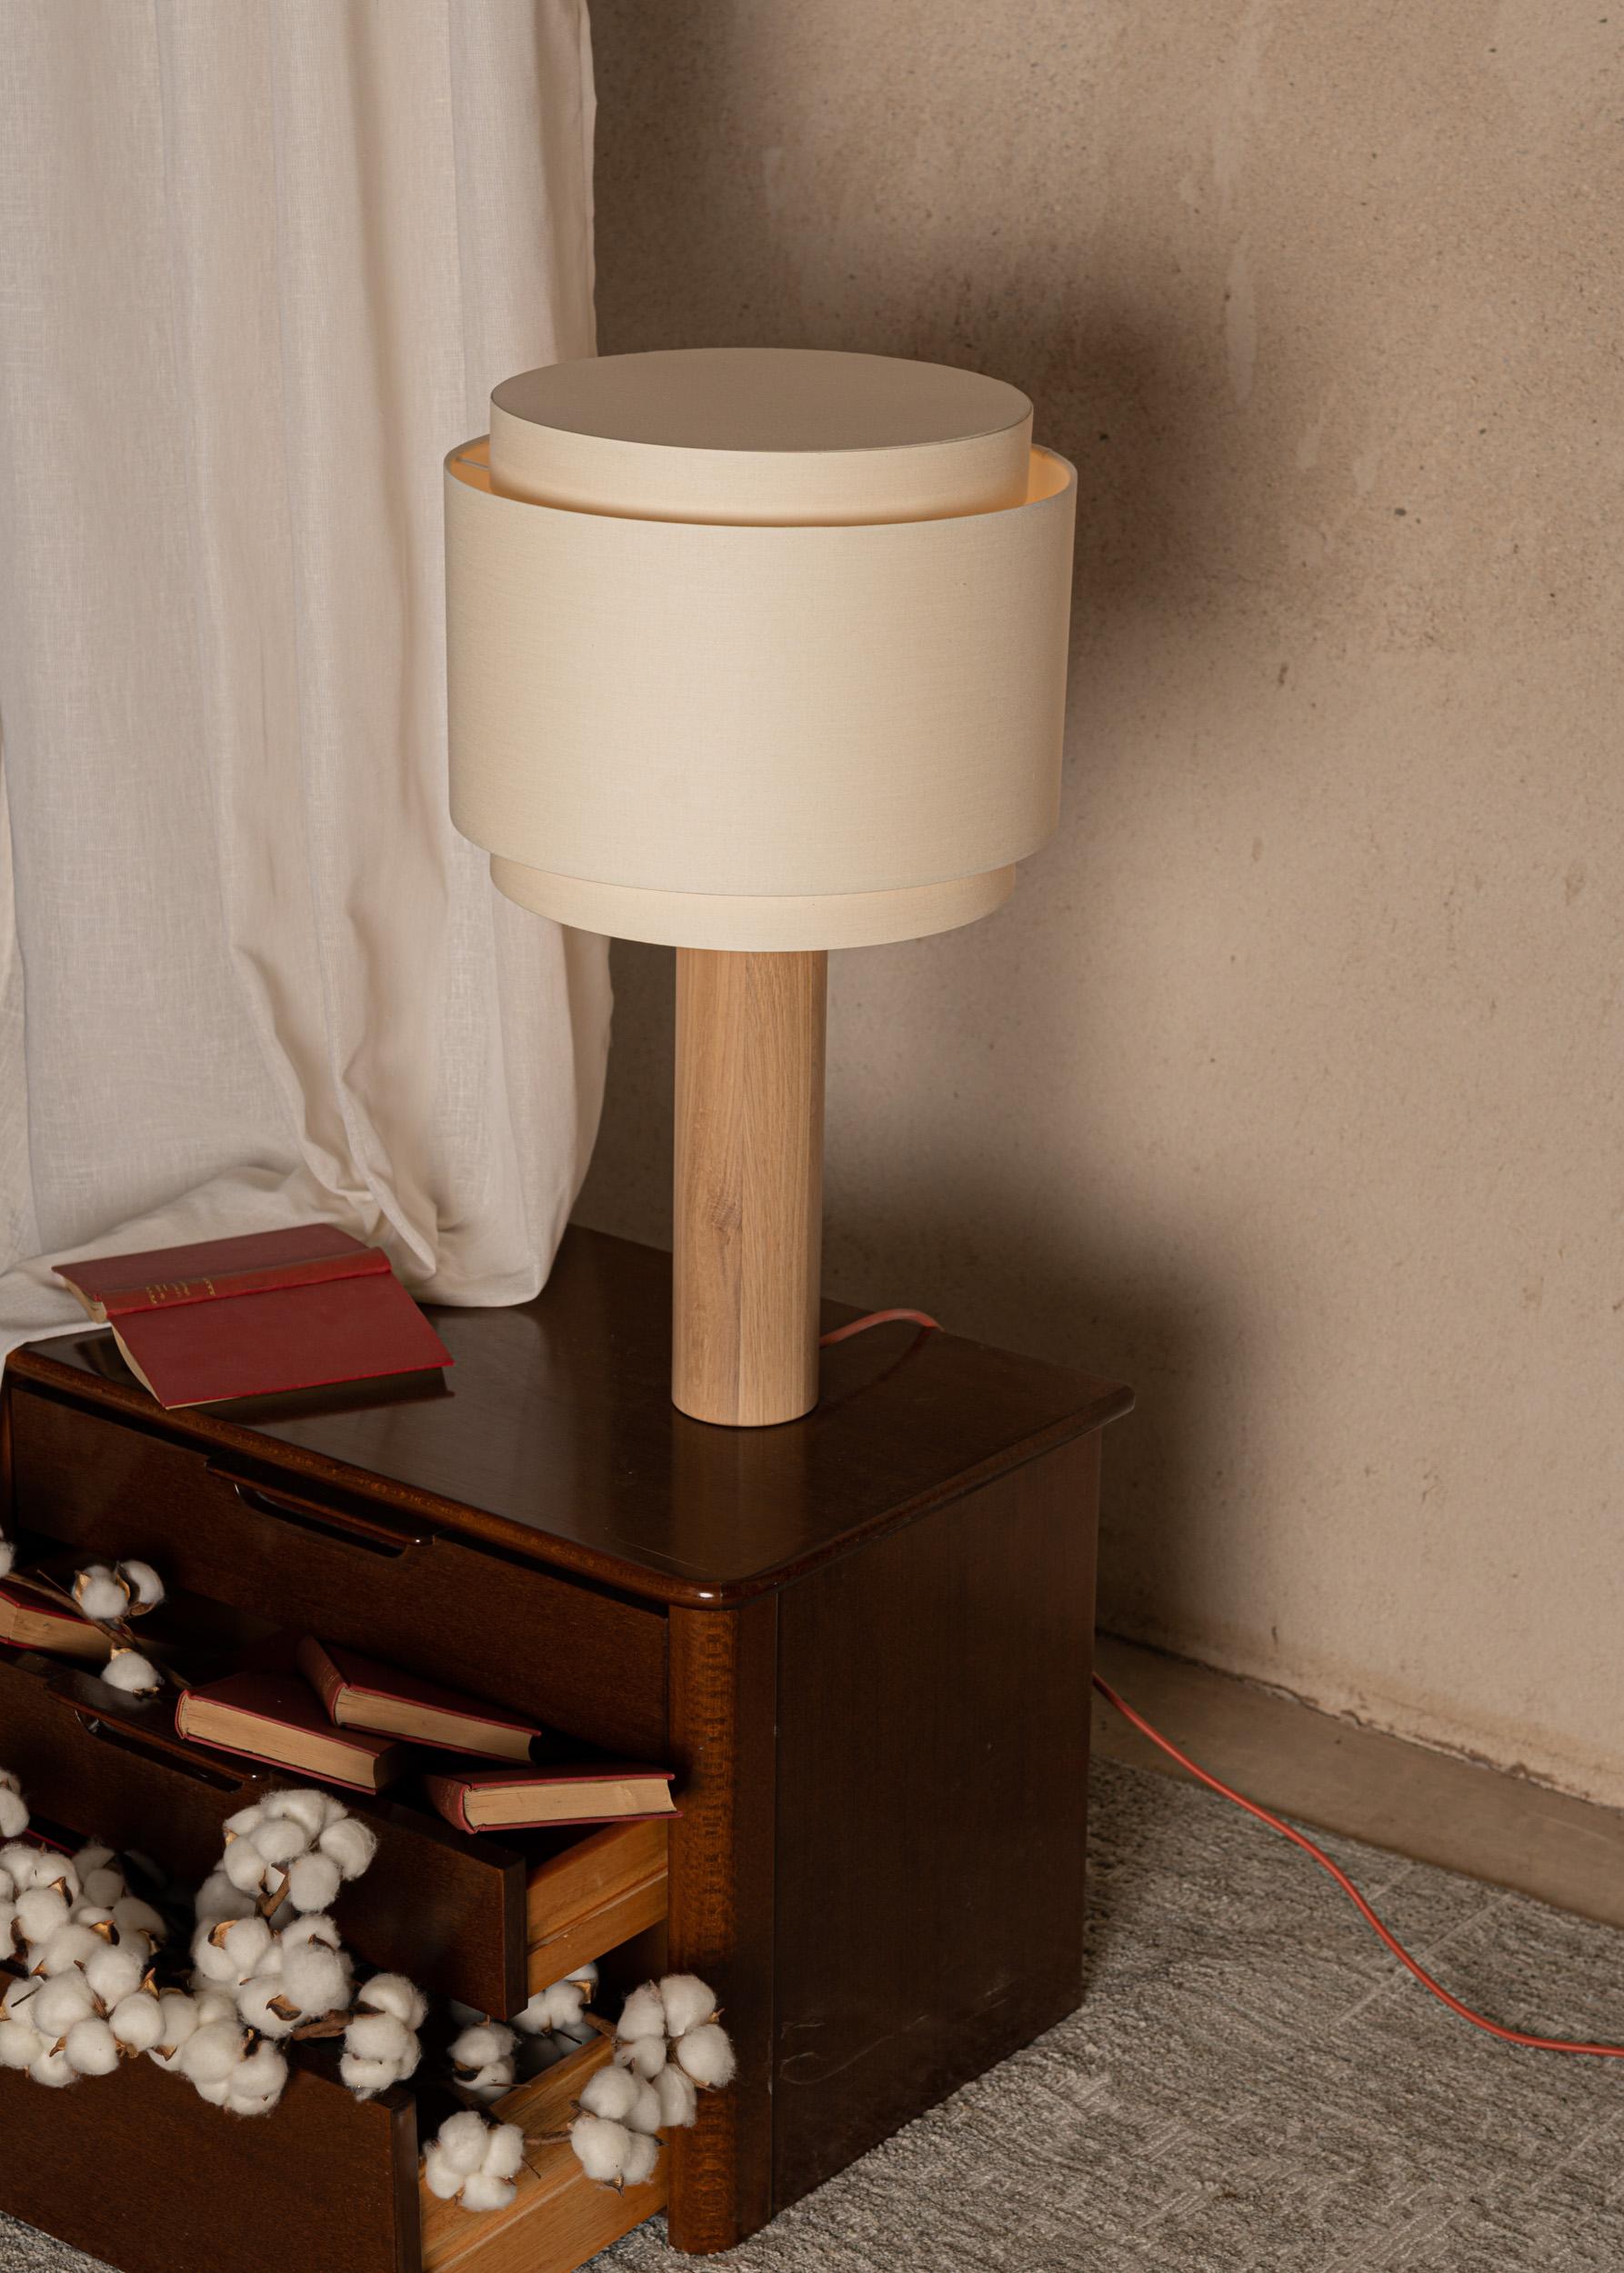 Oak Pipo Duoble Table Lamp by Simone & Marcel
Dimensions: D 35 x W 35 x H 60 cm.
Materials: Cotton and oak.

Also available in different marble and wood options and finishes. Custom options available on request. Please contact us. 

All our lamps